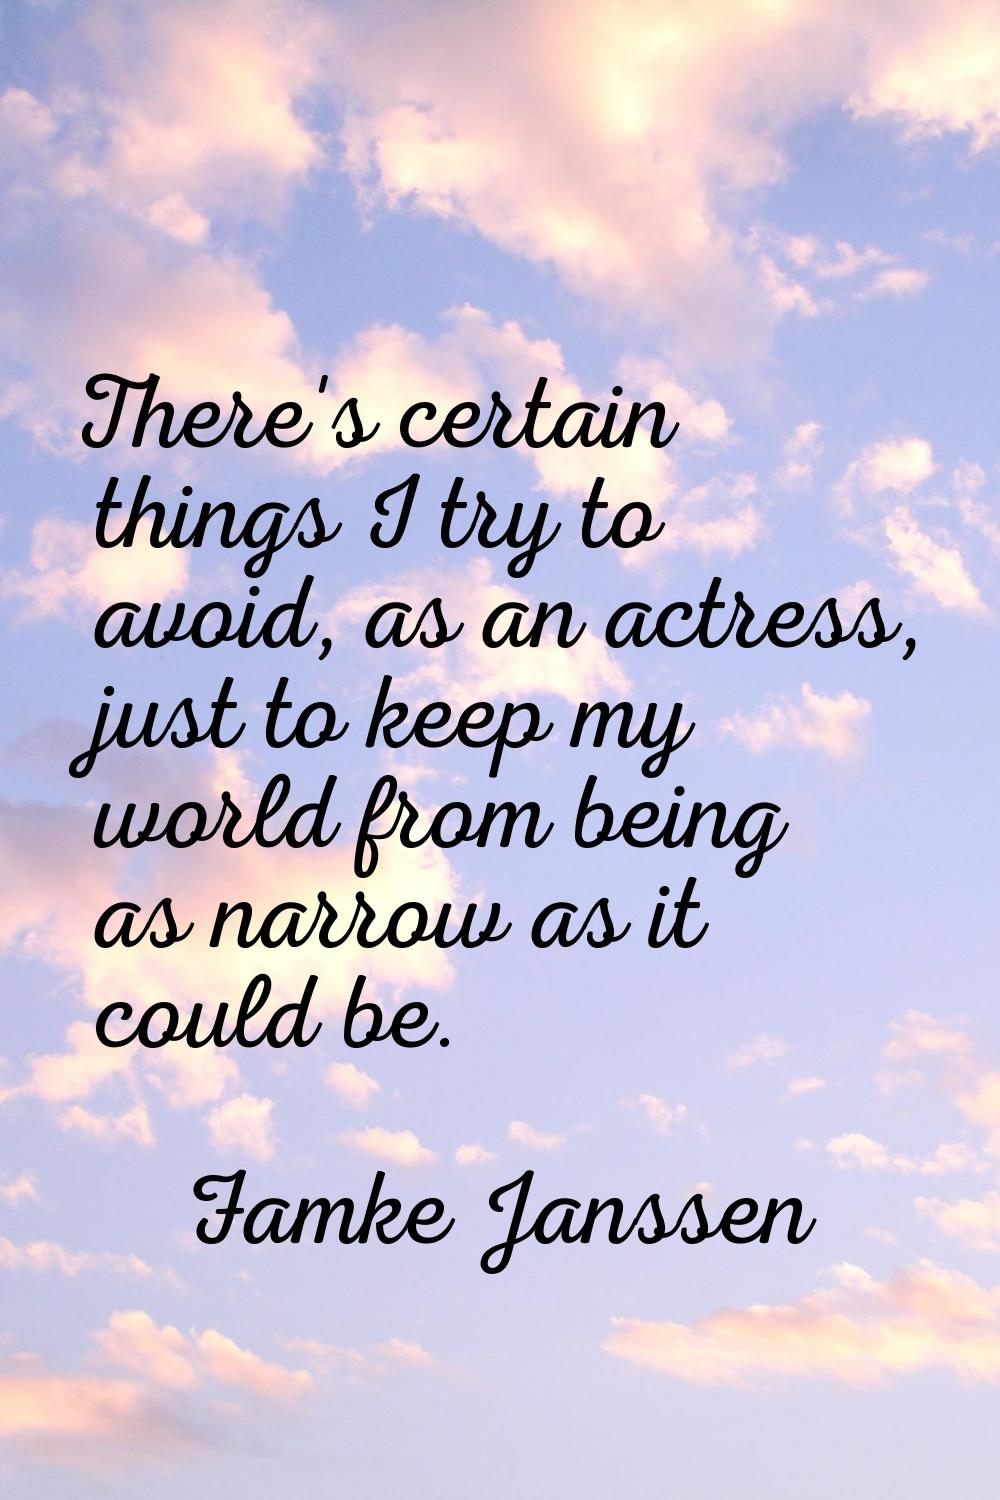 There's certain things I try to avoid, as an actress, just to keep my world from being as narrow as